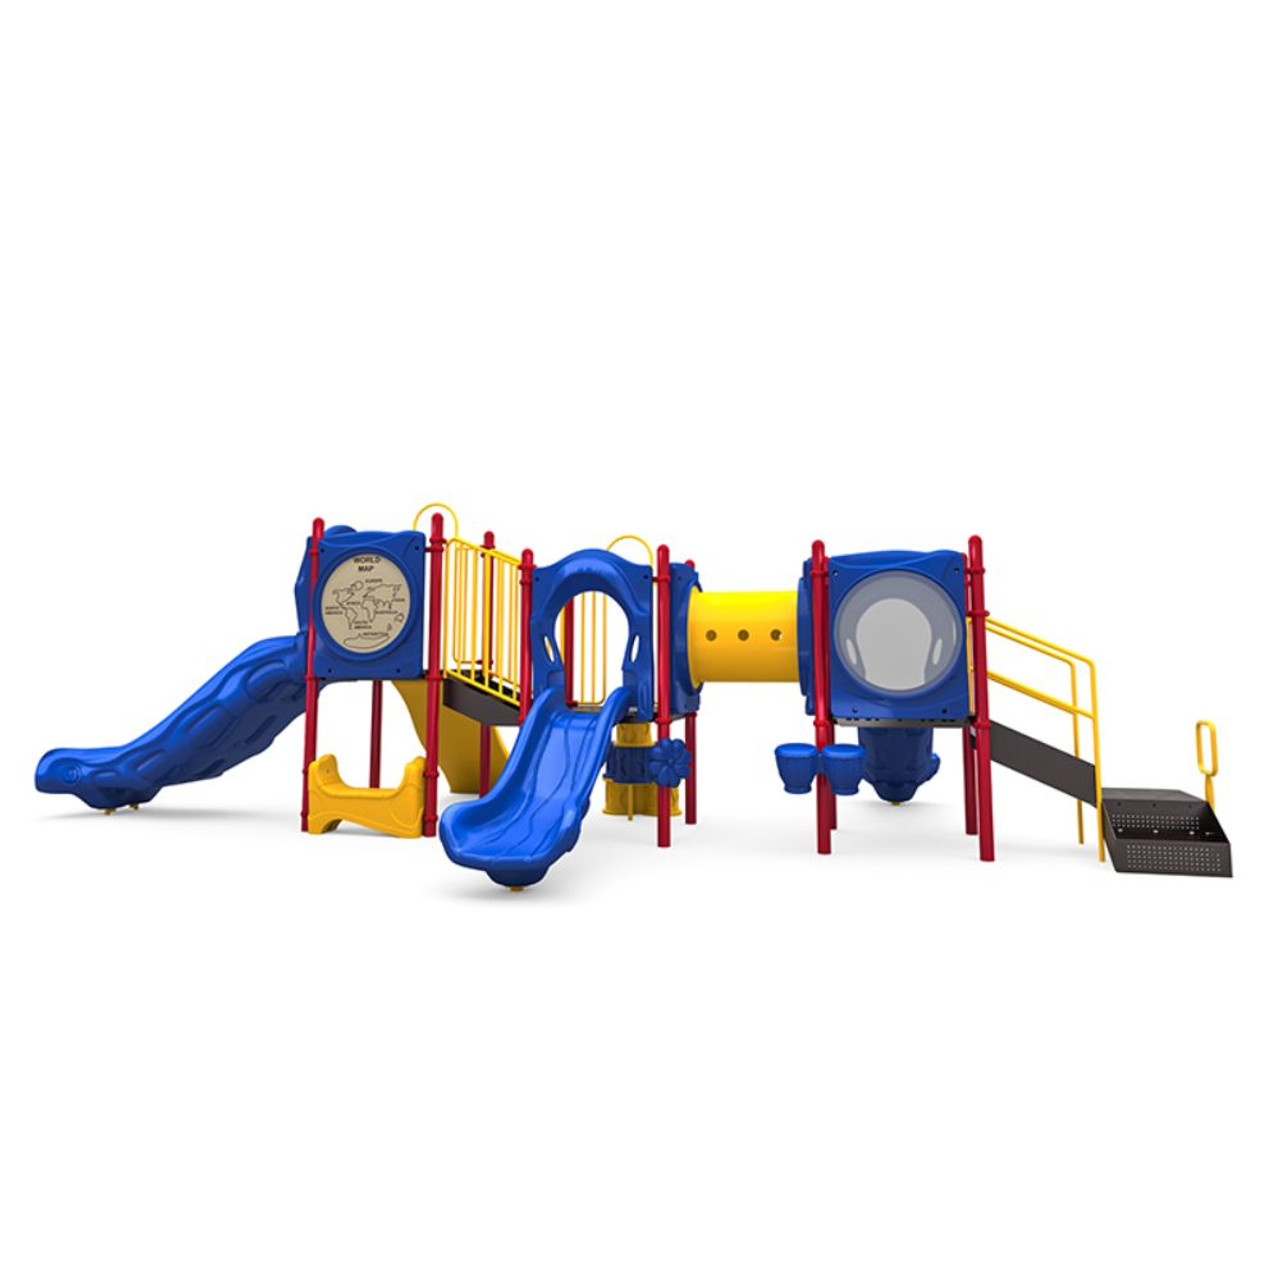 Play Time Playset - primary - front